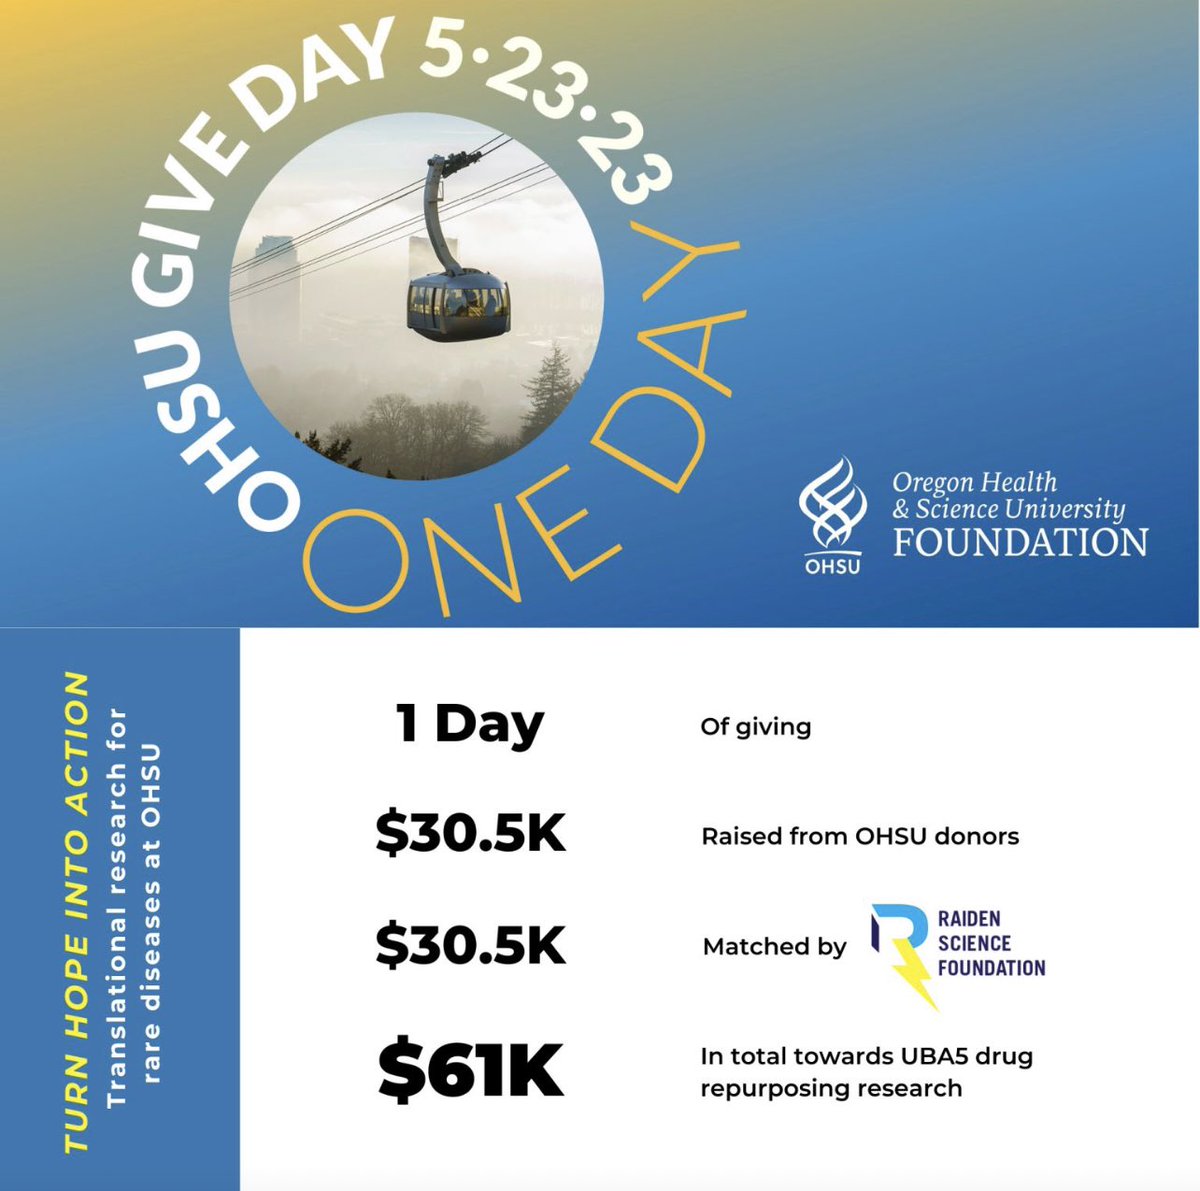 Exciting news! OHSU Give Day was a success! The community raised $30,500 in just 1 day. We also matched every $ raised through OHSU. These funds support drug repurposing aimed to find a treatment for UBA5. Thanks to all who contributed to help advance rare disease research. ❤️